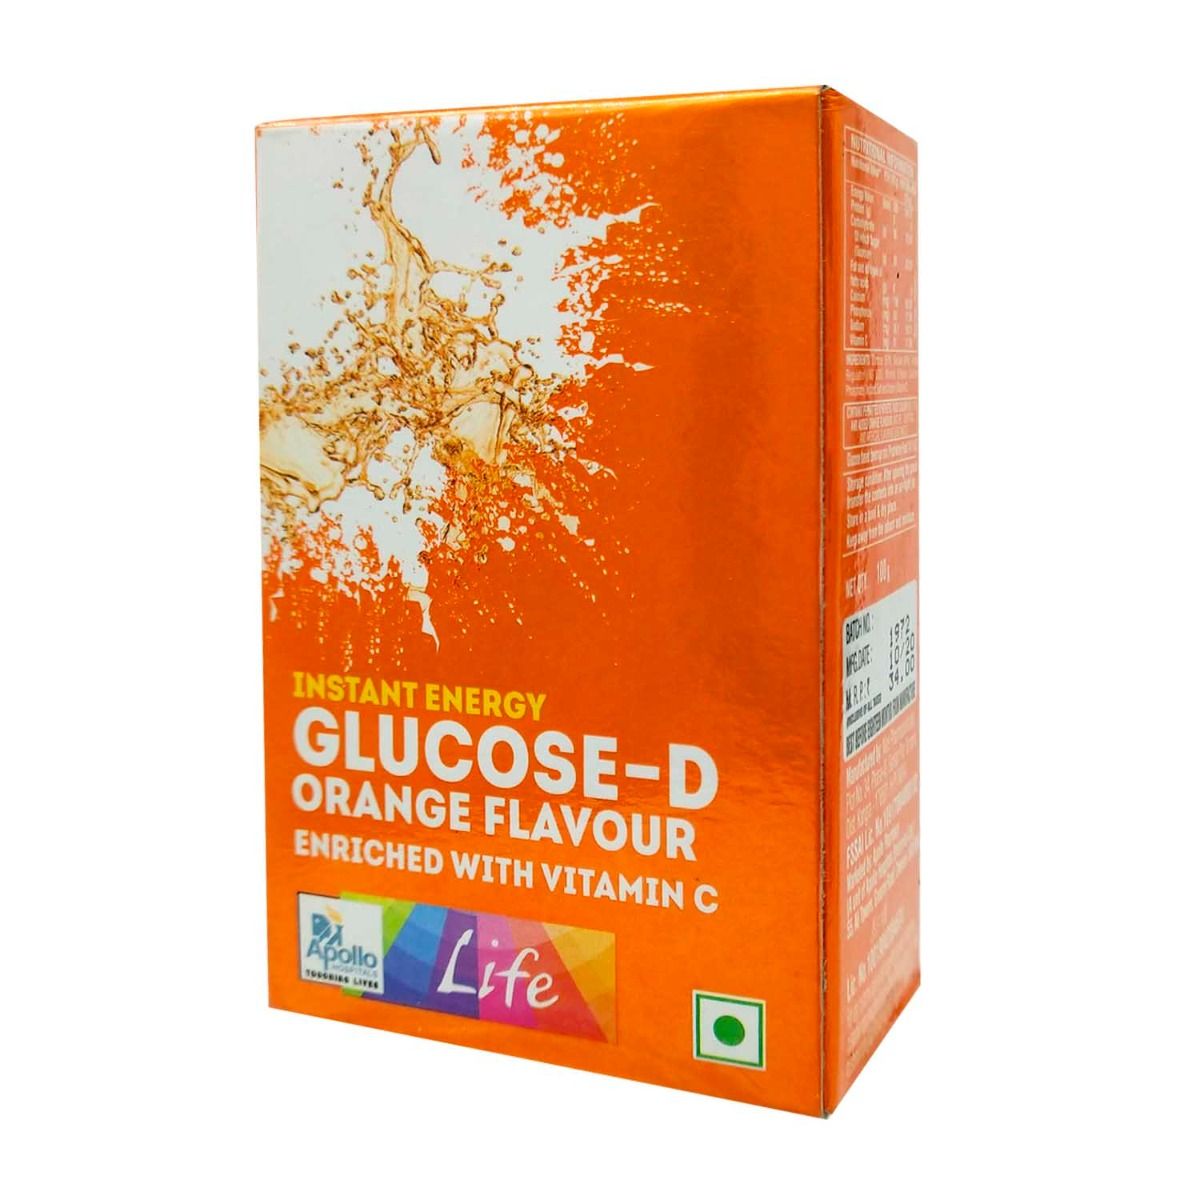 Buy Apollo Life Glucose-D Orange Flavour Instant Energy Drink, 100 gm Refill Pack Online